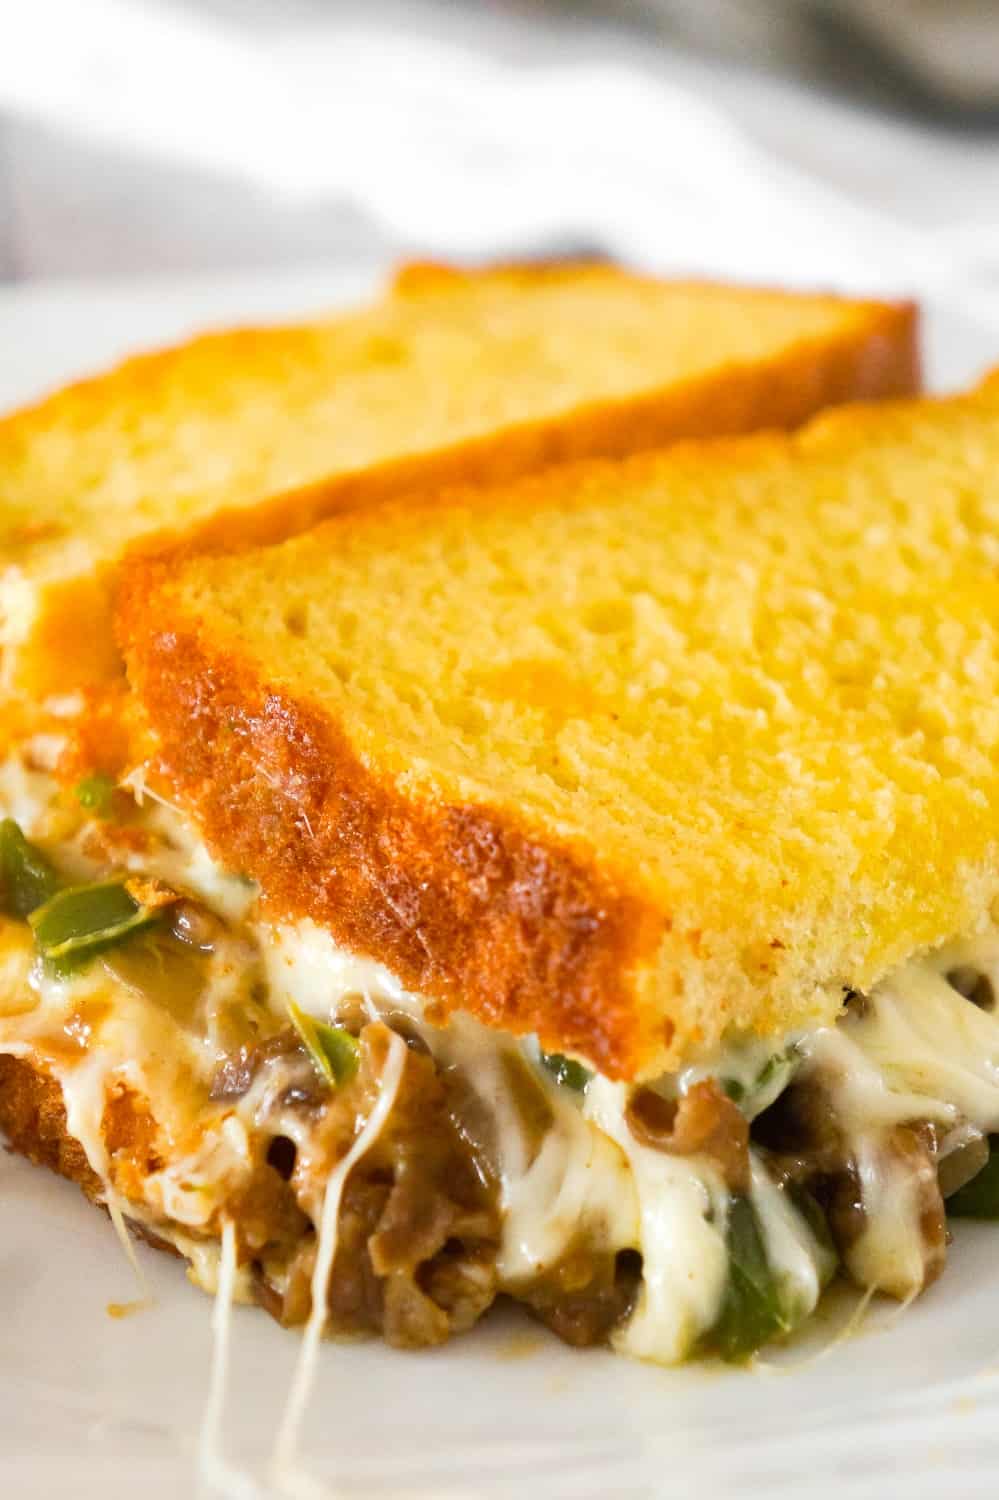 Philly Cheese Steak Grilled Cheese Casserole is a fun twist on a classic sandwich. This simple and delicious casserole is loaded with roast beef, green peppers, onions and oozing with mozzarella cheese.